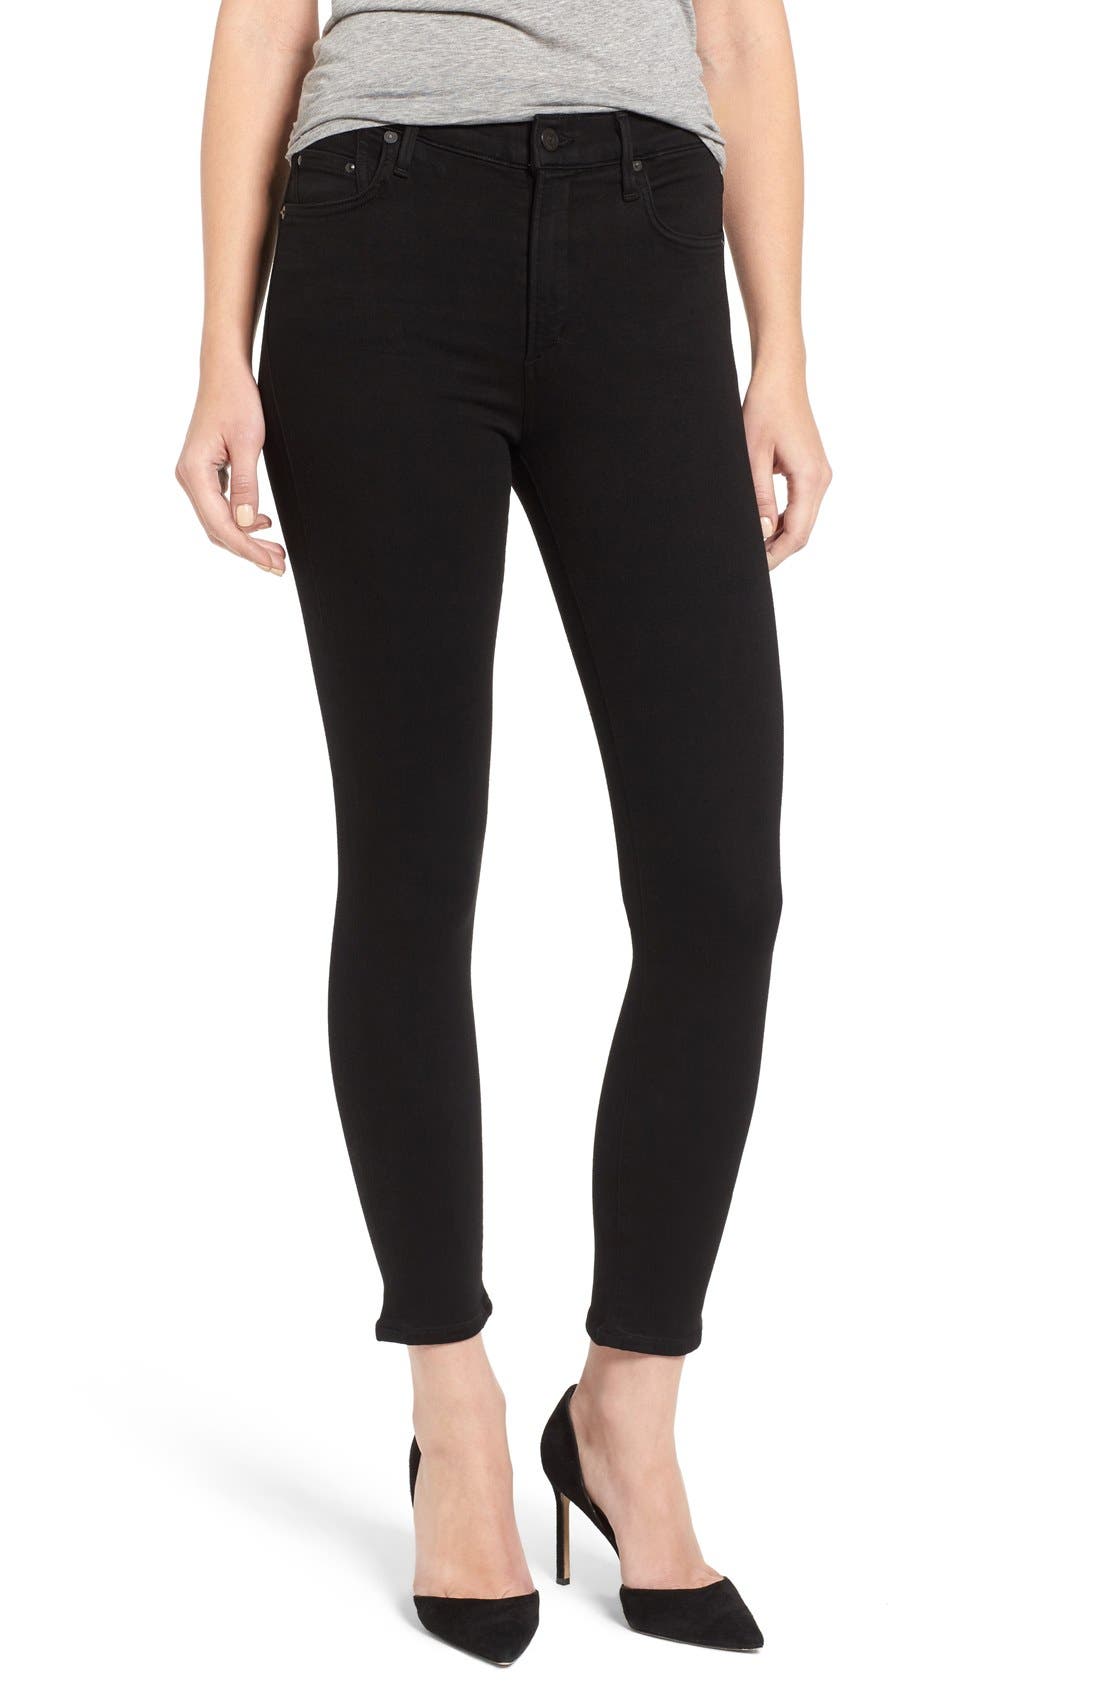 citizens of humanity black skinny jeans